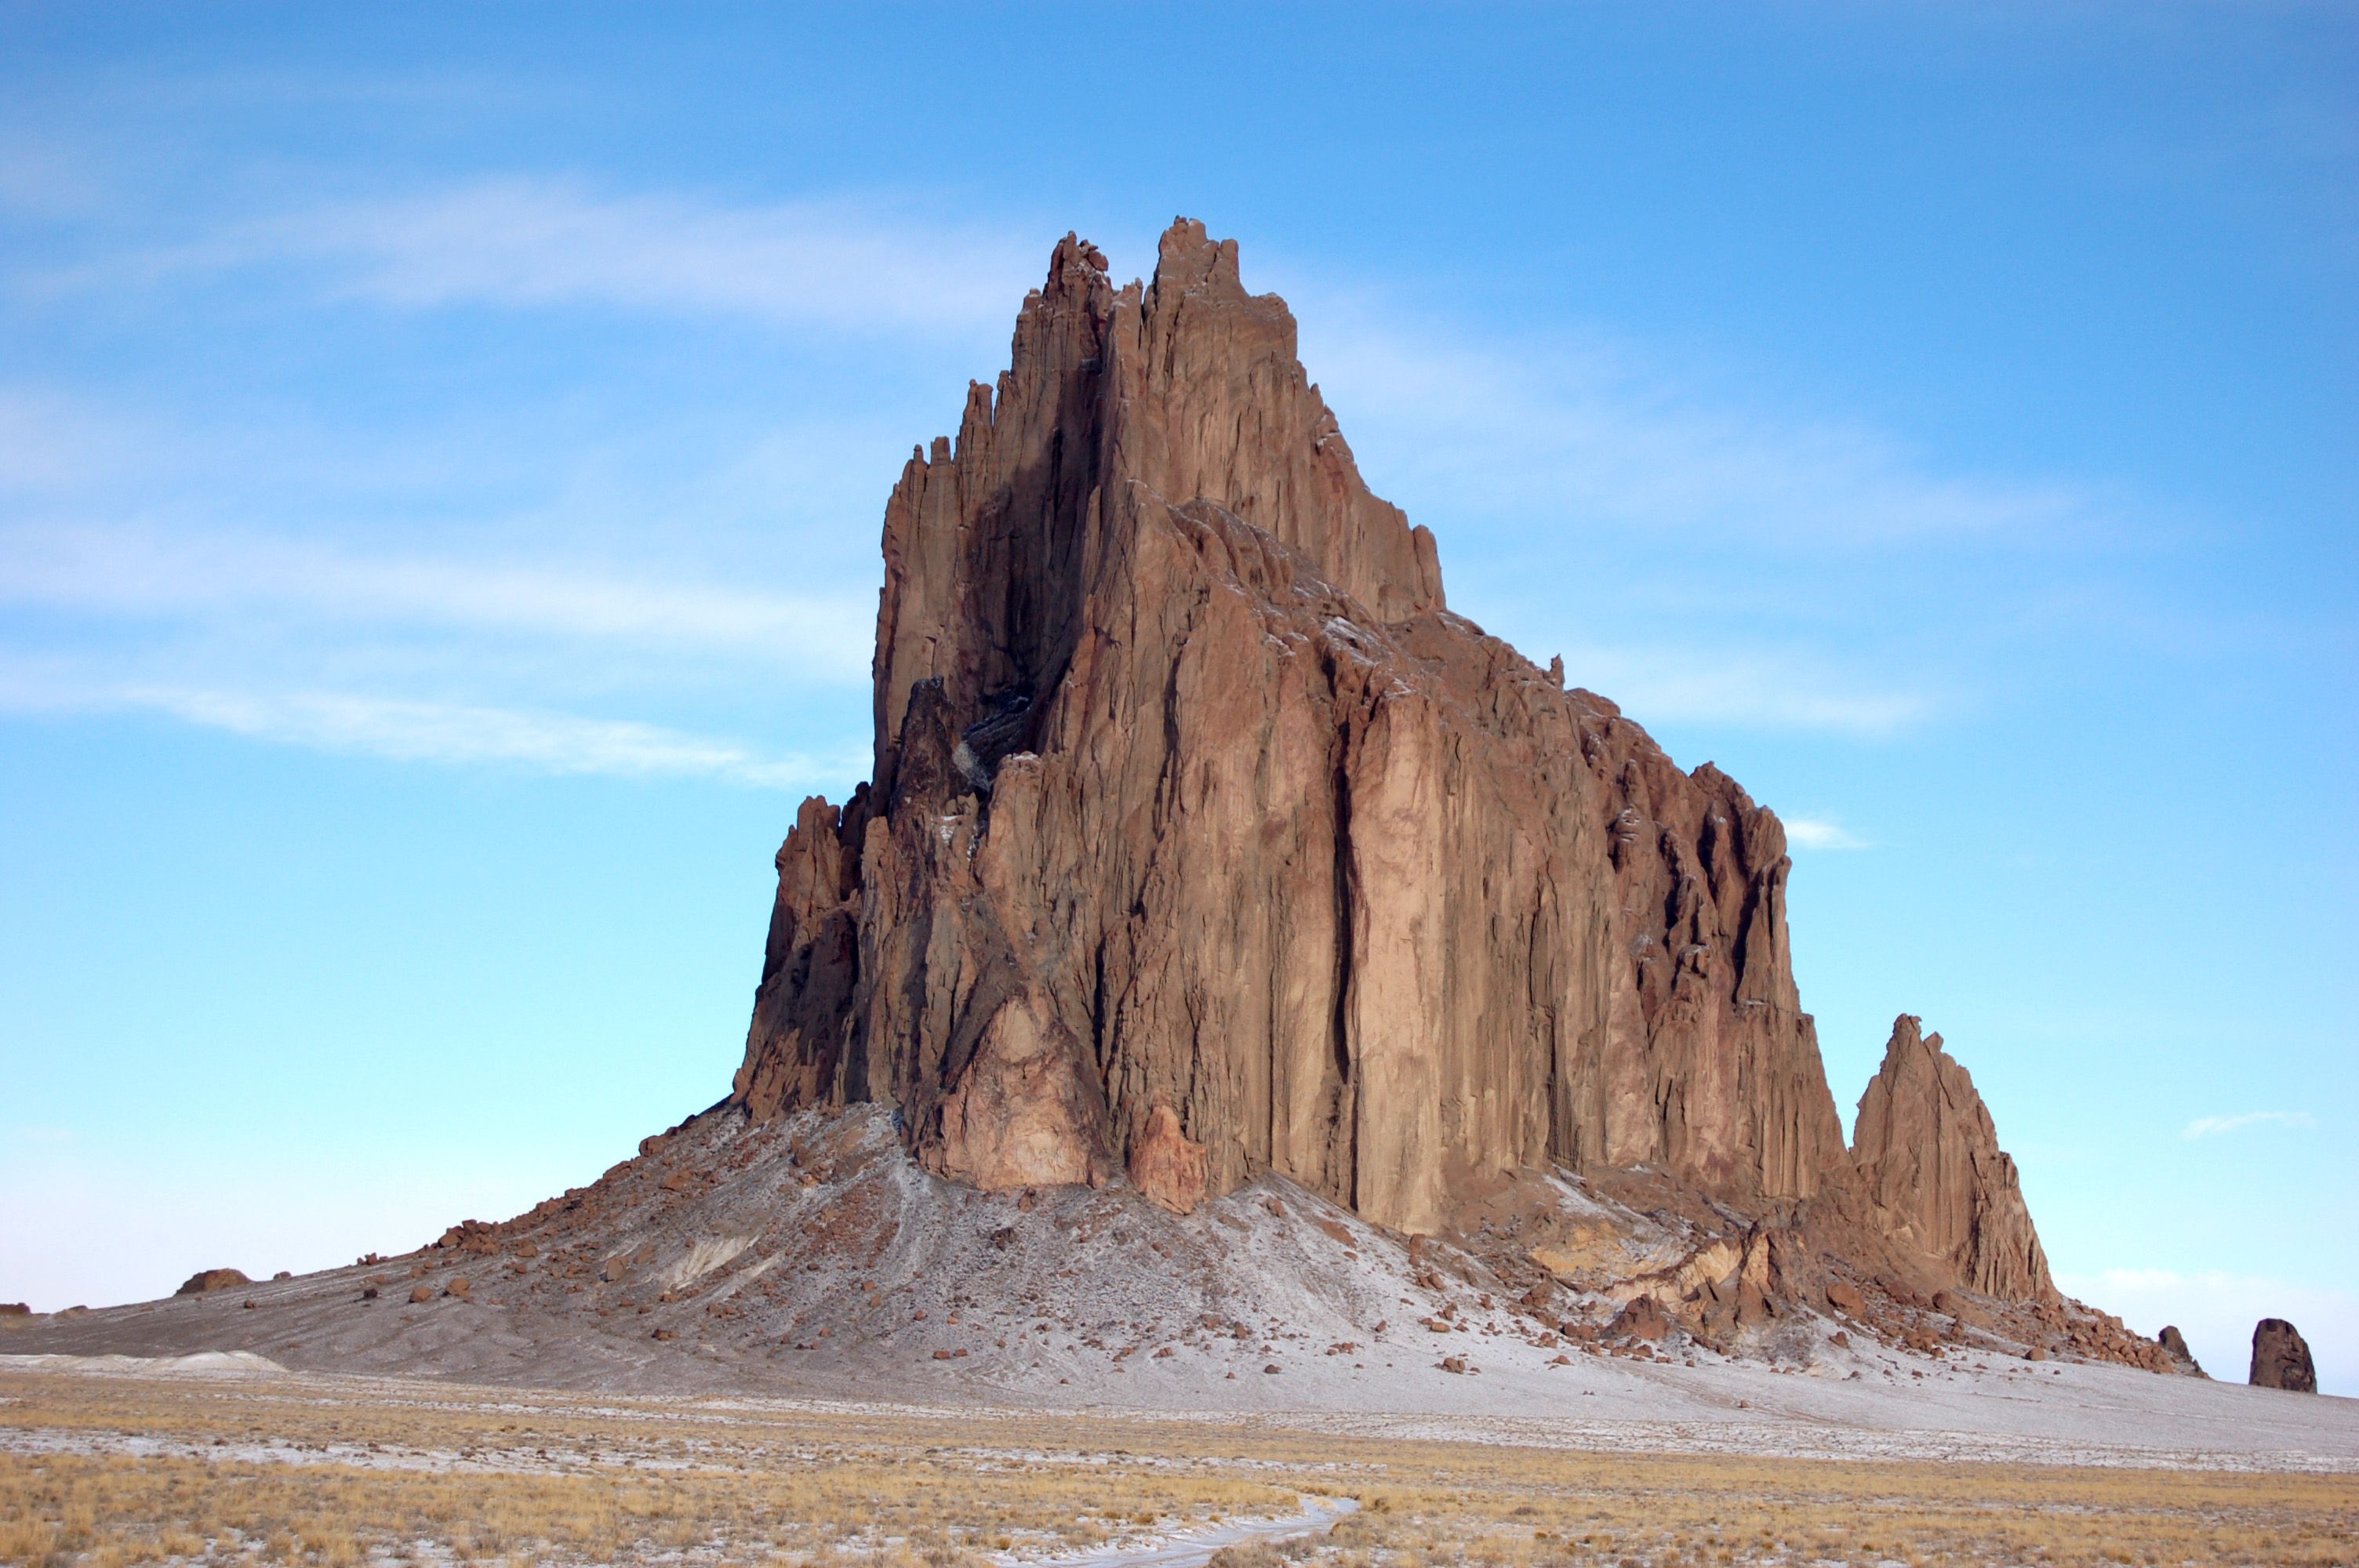 Shiprock Rock Formation New Mexico Wallpapers Wallpaper Cave